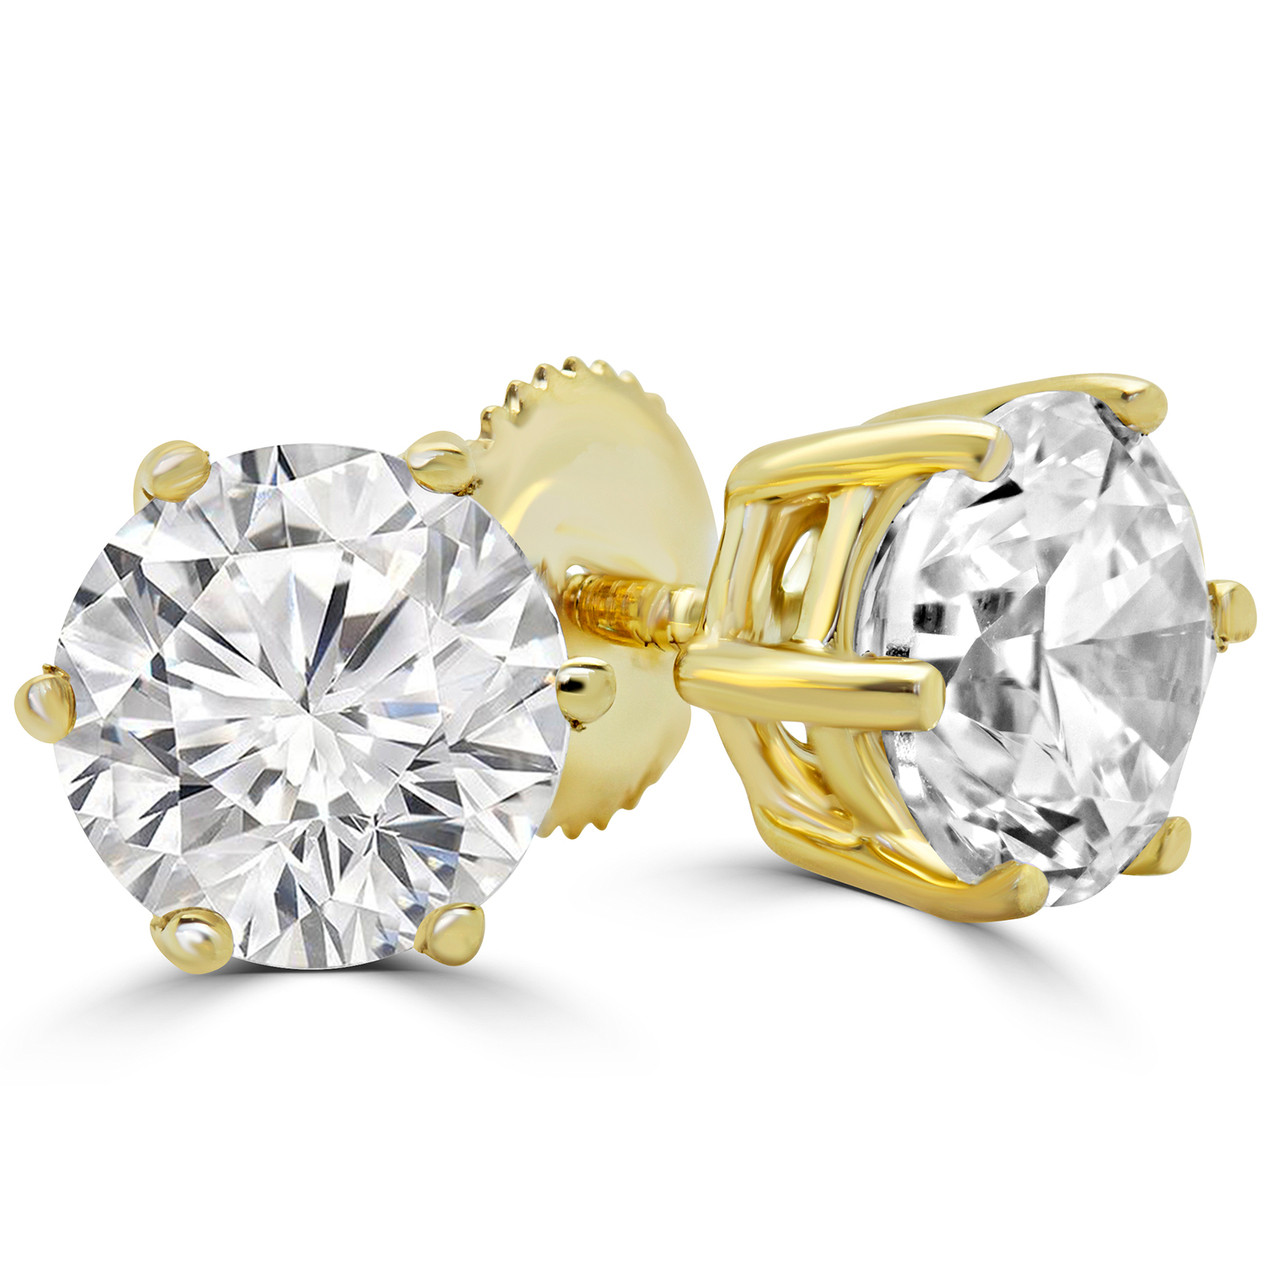 Round Cut Diamond Solitaire 6-Prong Stud Earrings in Yellow Gold with Screw  Backs - #HE4905-Y - Bijoux Majesty